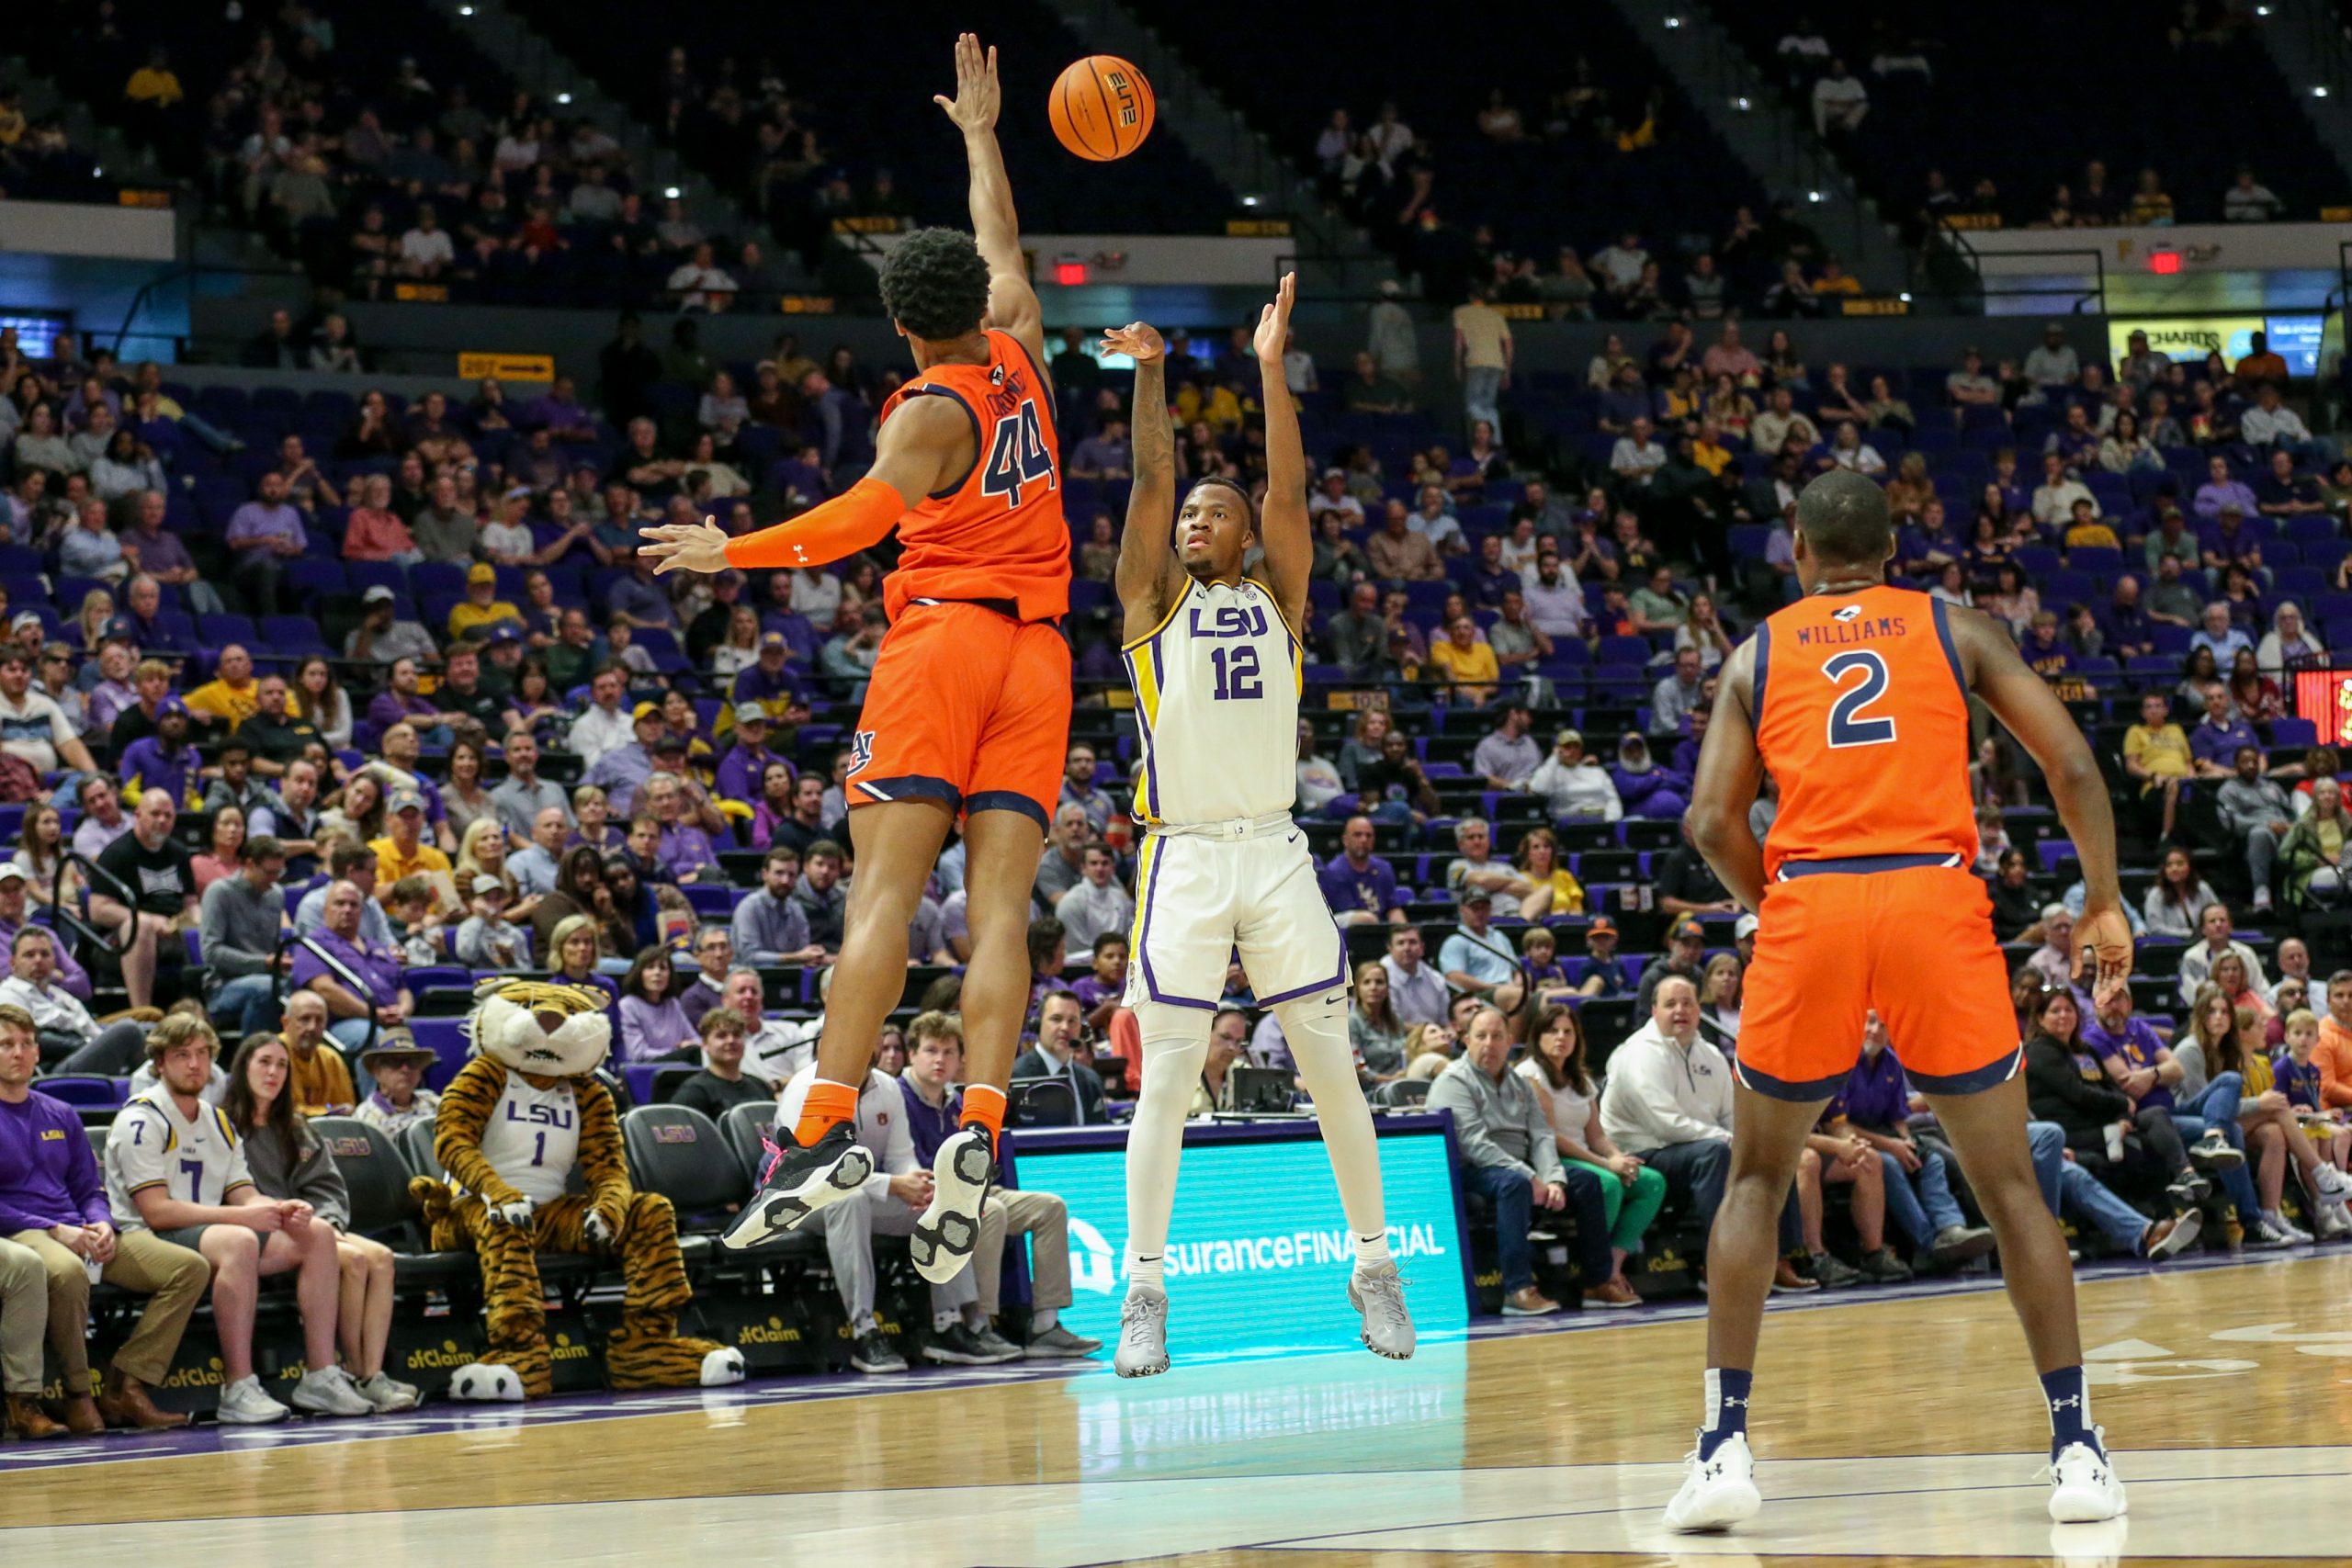 KJ Williams, LSU's leading scorer, launches a 3-point shot in the Tigers' loss to Auburn on January 18, 2023 in SEC play at the Pete Maravich Assembly Center